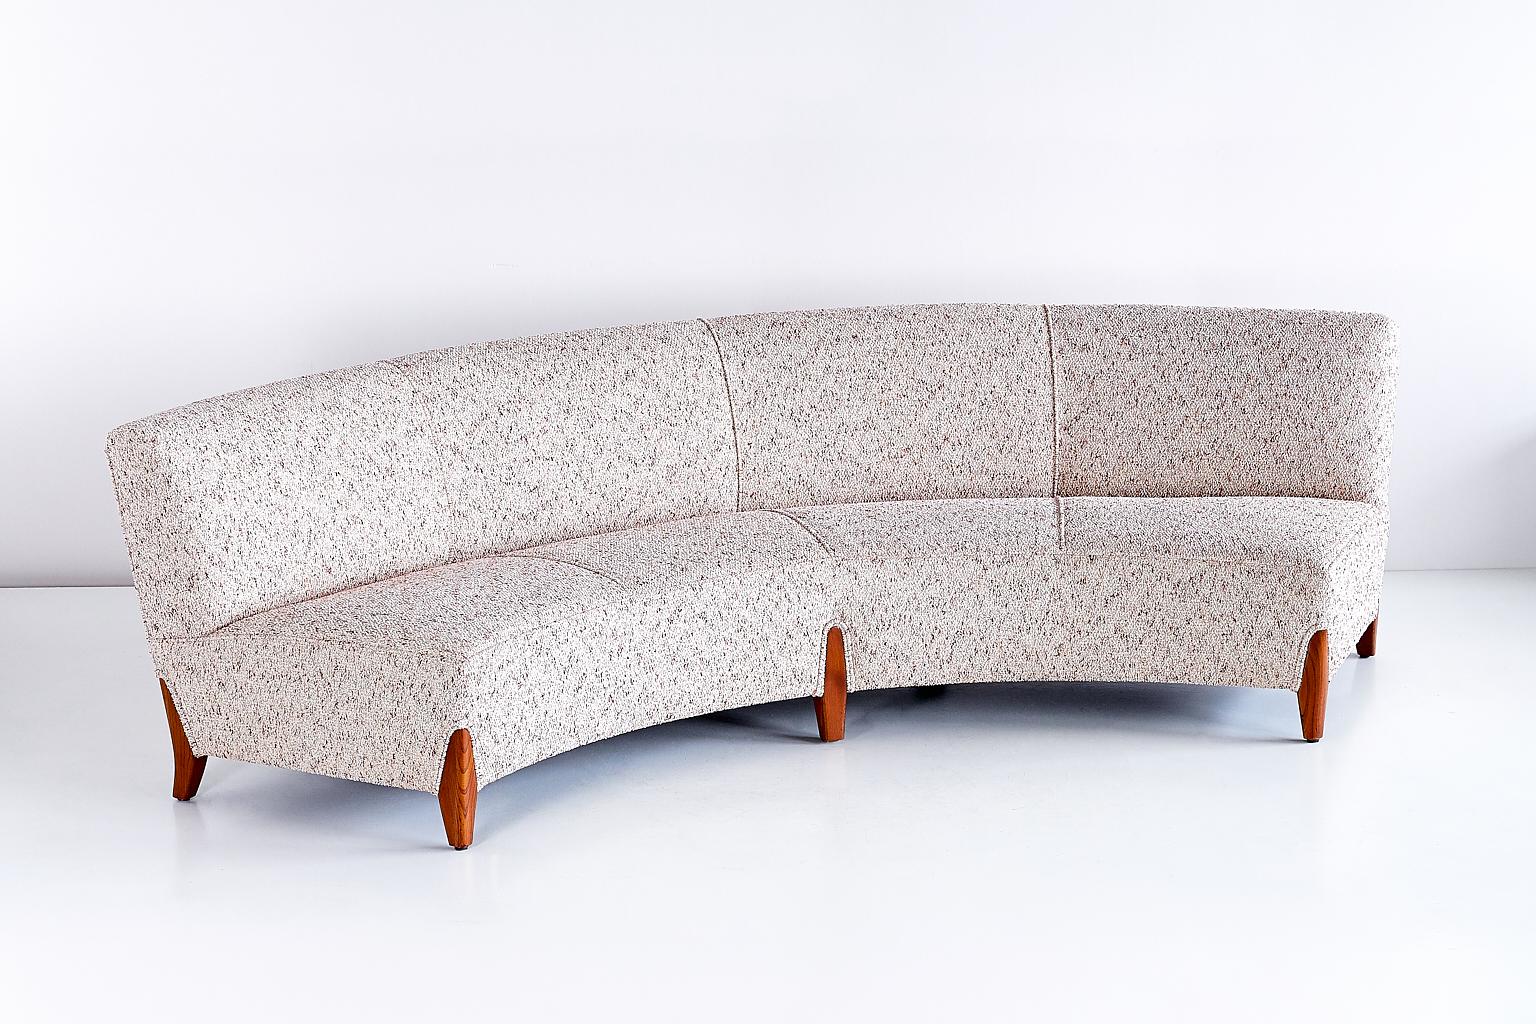 Scandinavian Modern Important Otto Schulz Curved Four-Seat Sofa for Boet, Sweden, Mid-1940s For Sale